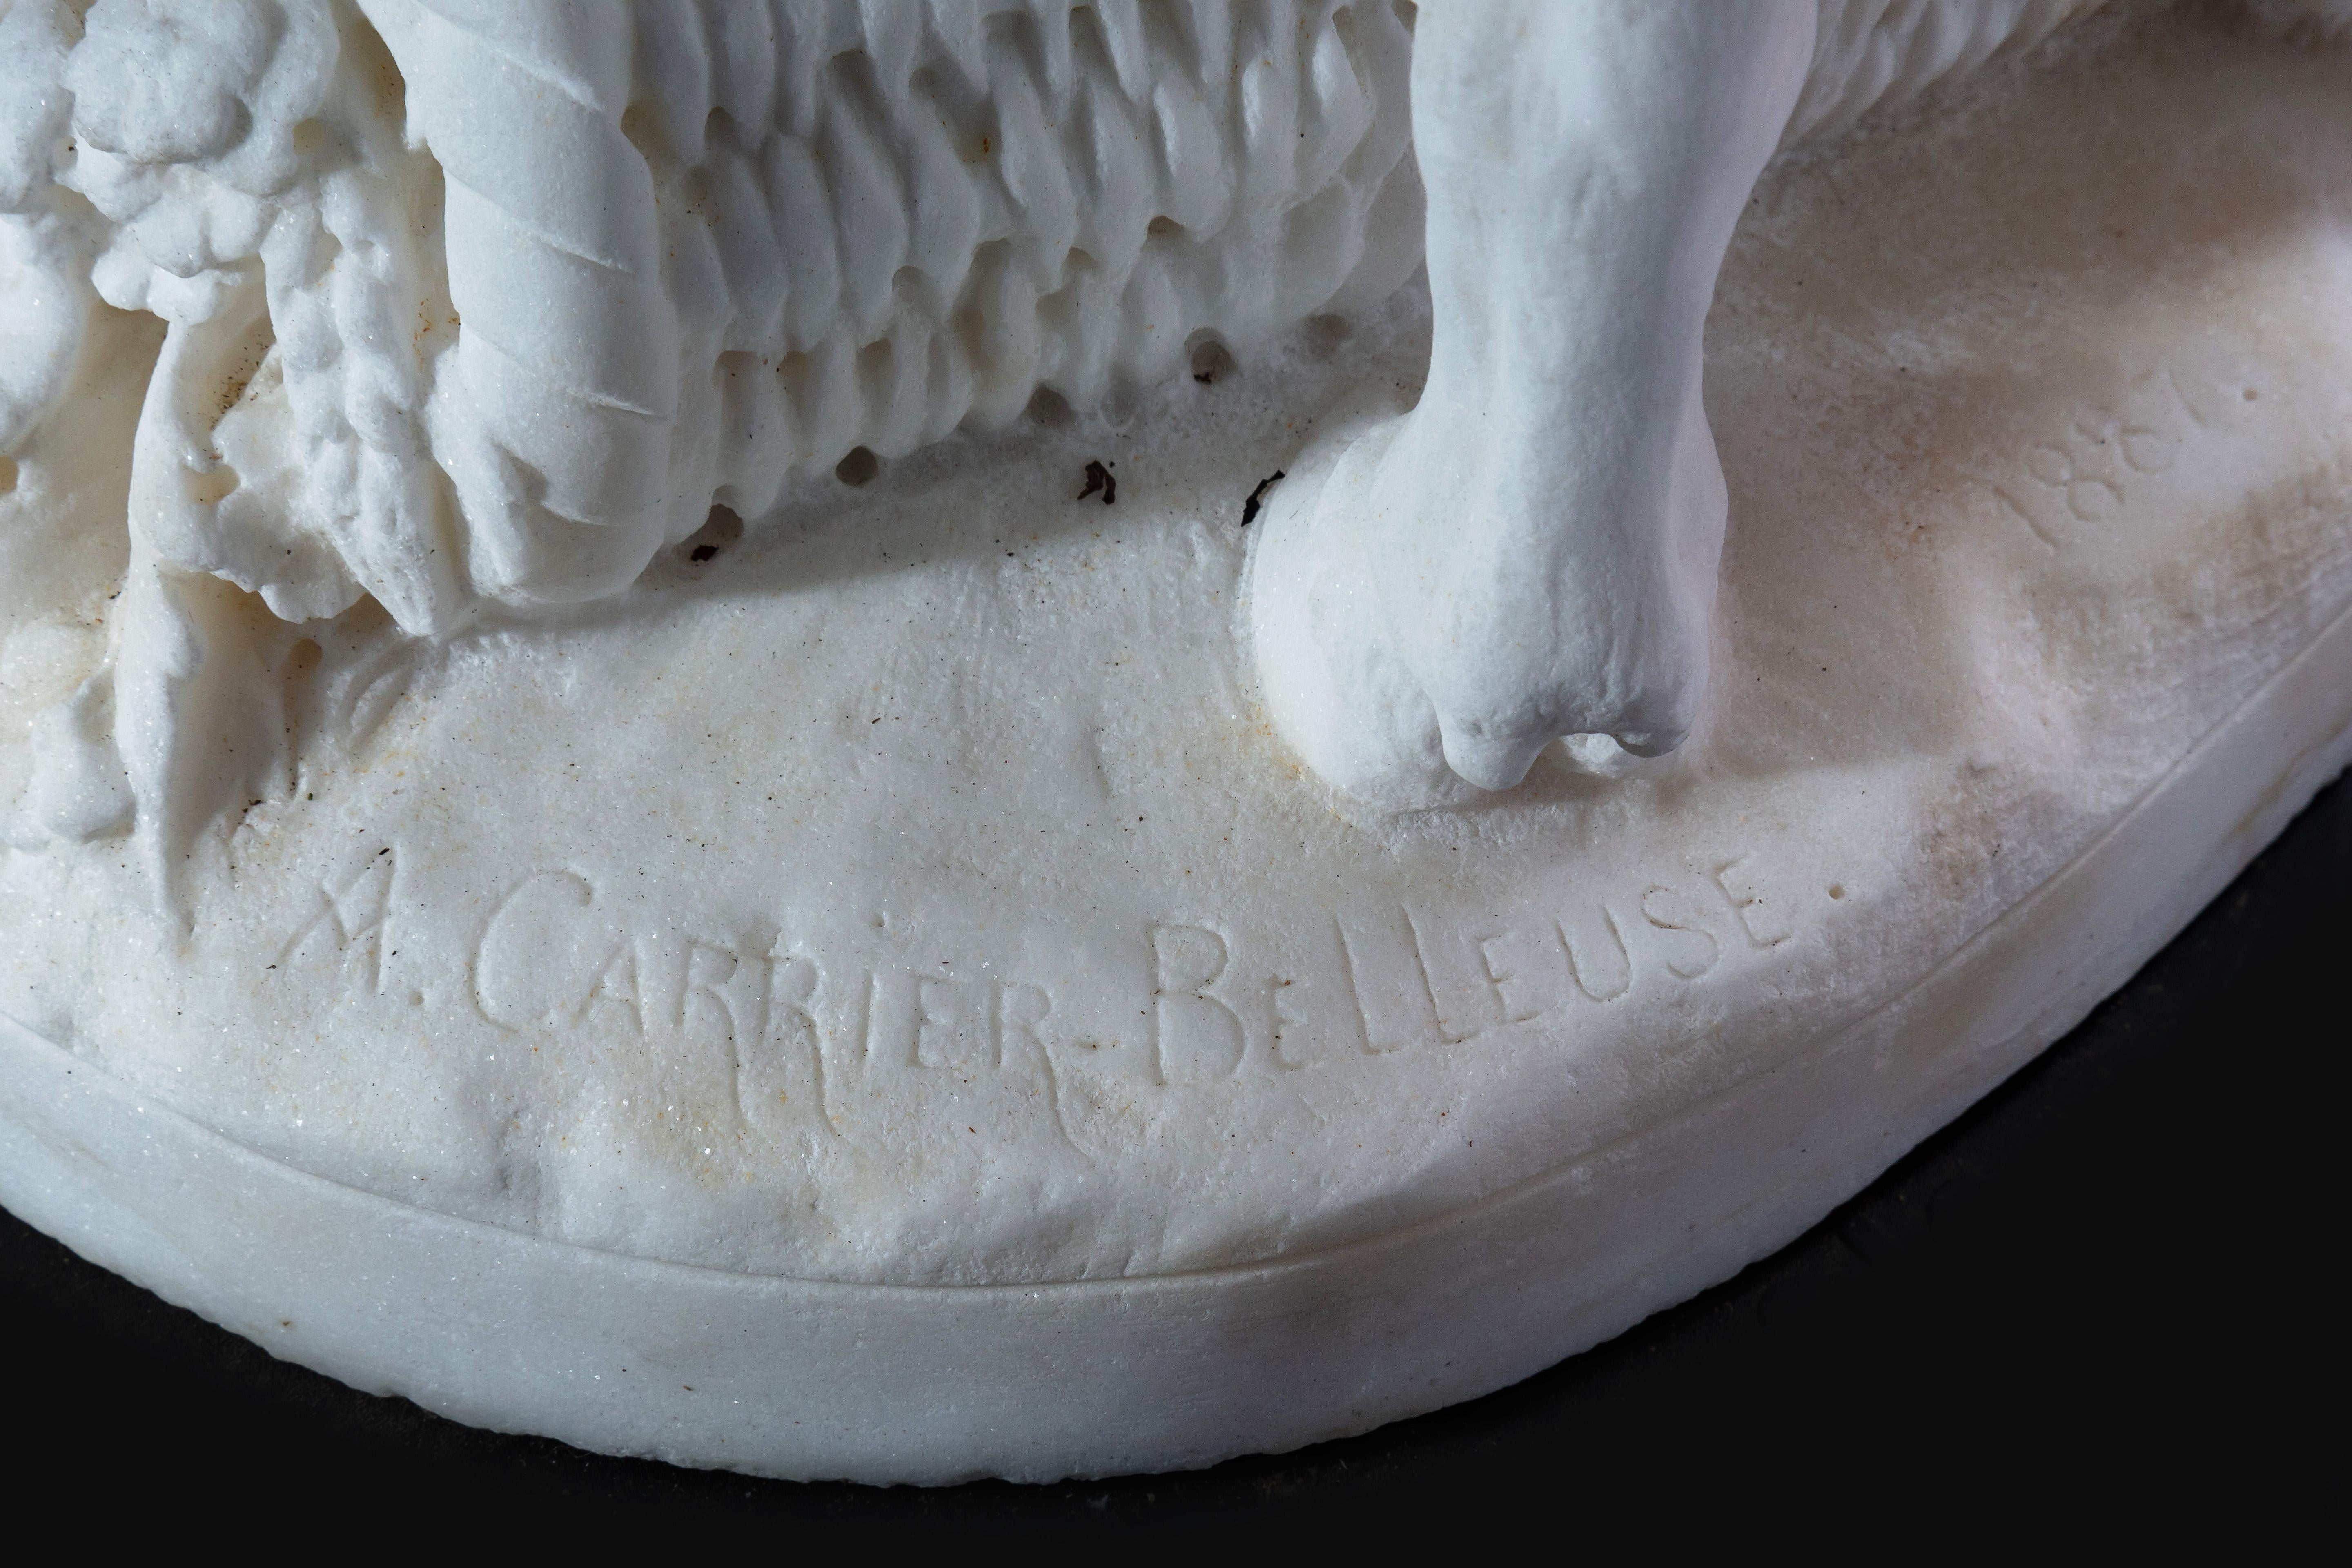 Le Retour des Champs ‘Return from the Harvest’ Carrara Marble, Signed and Dated 13